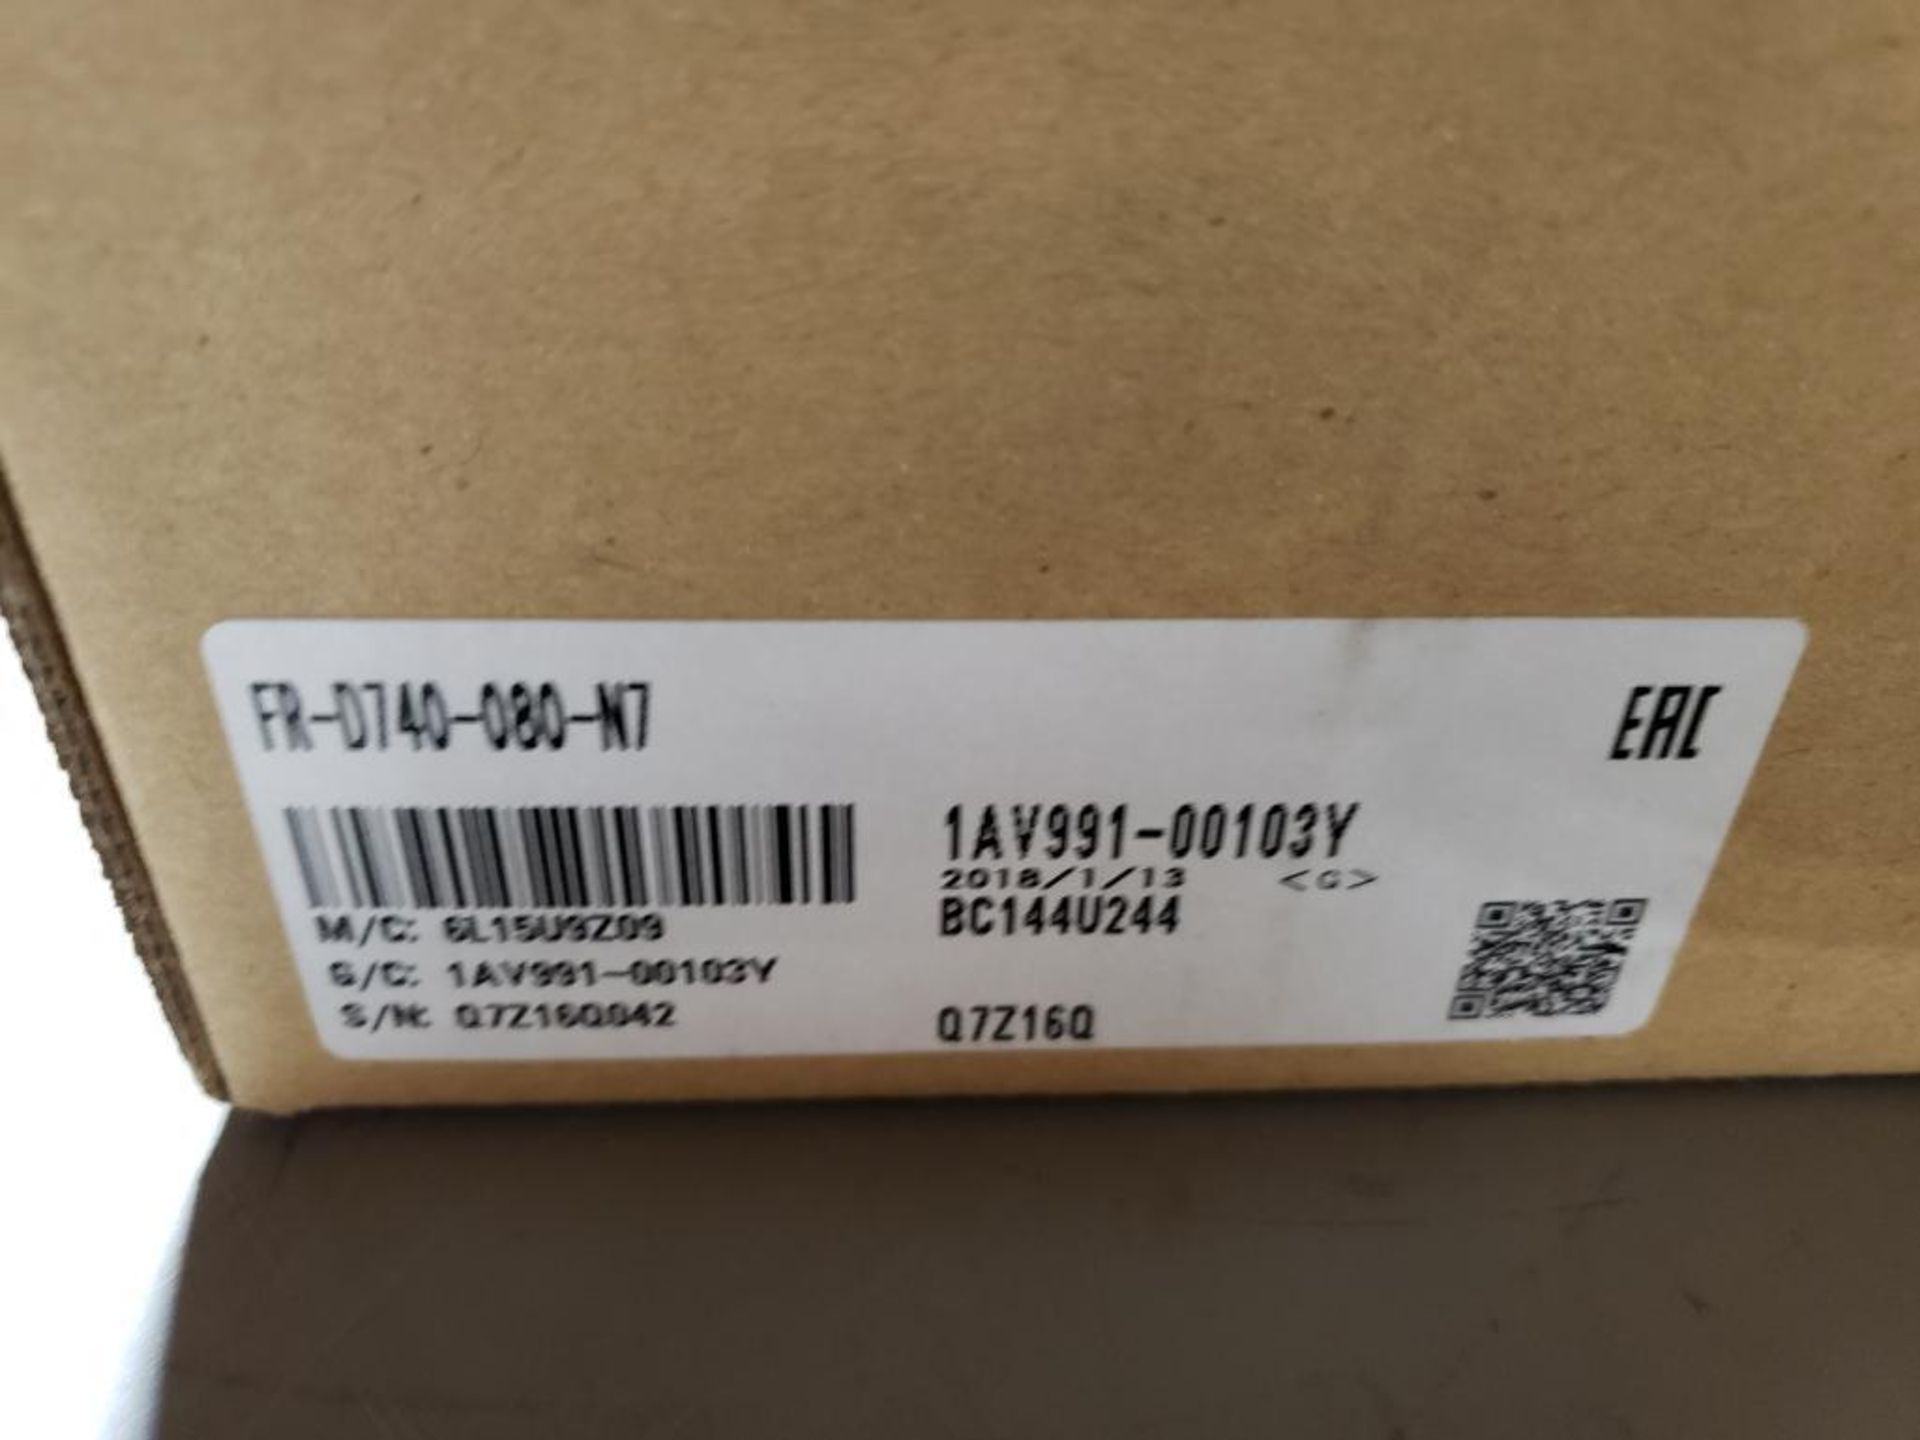 Mitsubishi inverter drive. Part number FR-D740-080-N7. New in box. - Image 5 of 7